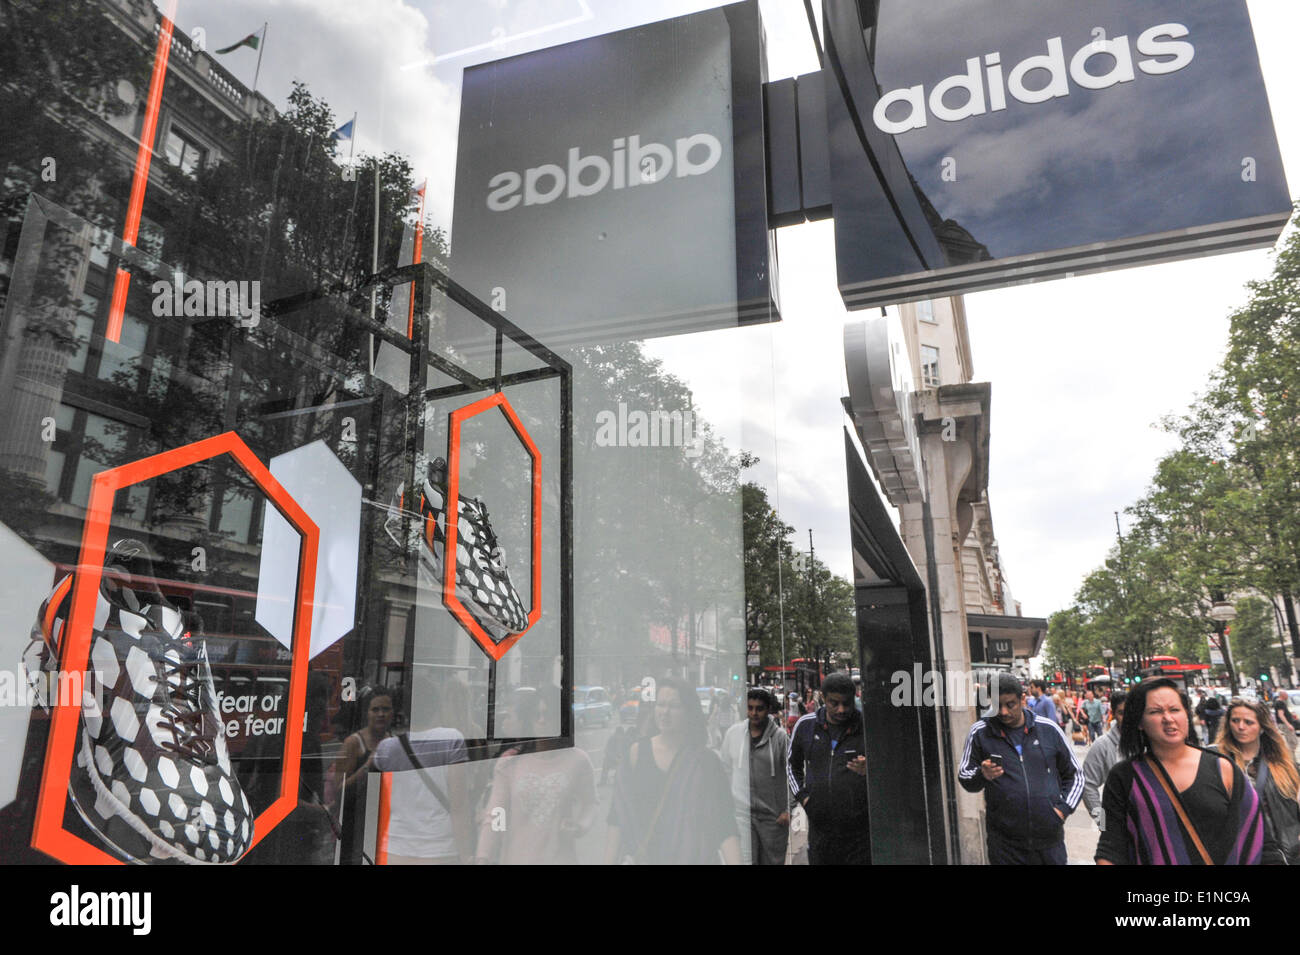 Oxford Street, London, UK. 7th June 2014. Adidas store with World Cup boots  and kit ahead of the World Cup in Brazil. Credit: Matthew Chattle/Alamy  Live News Stock Photo - Alamy